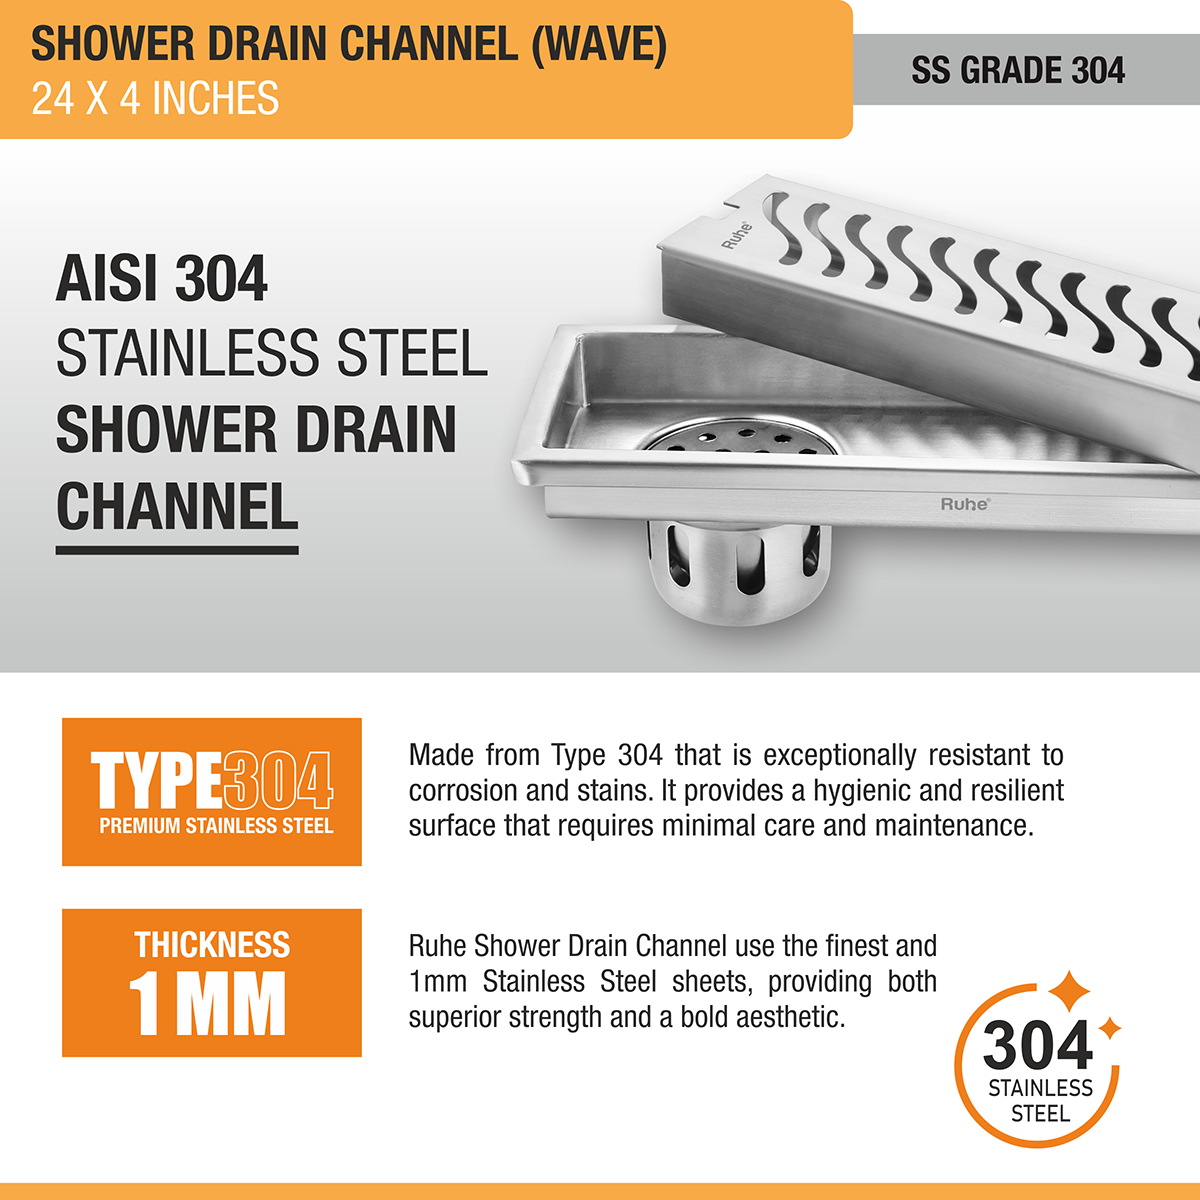 Wave Shower Drain Channel (24 X 4 Inches) with Cockroach Trap (304 Grade) stainless steel